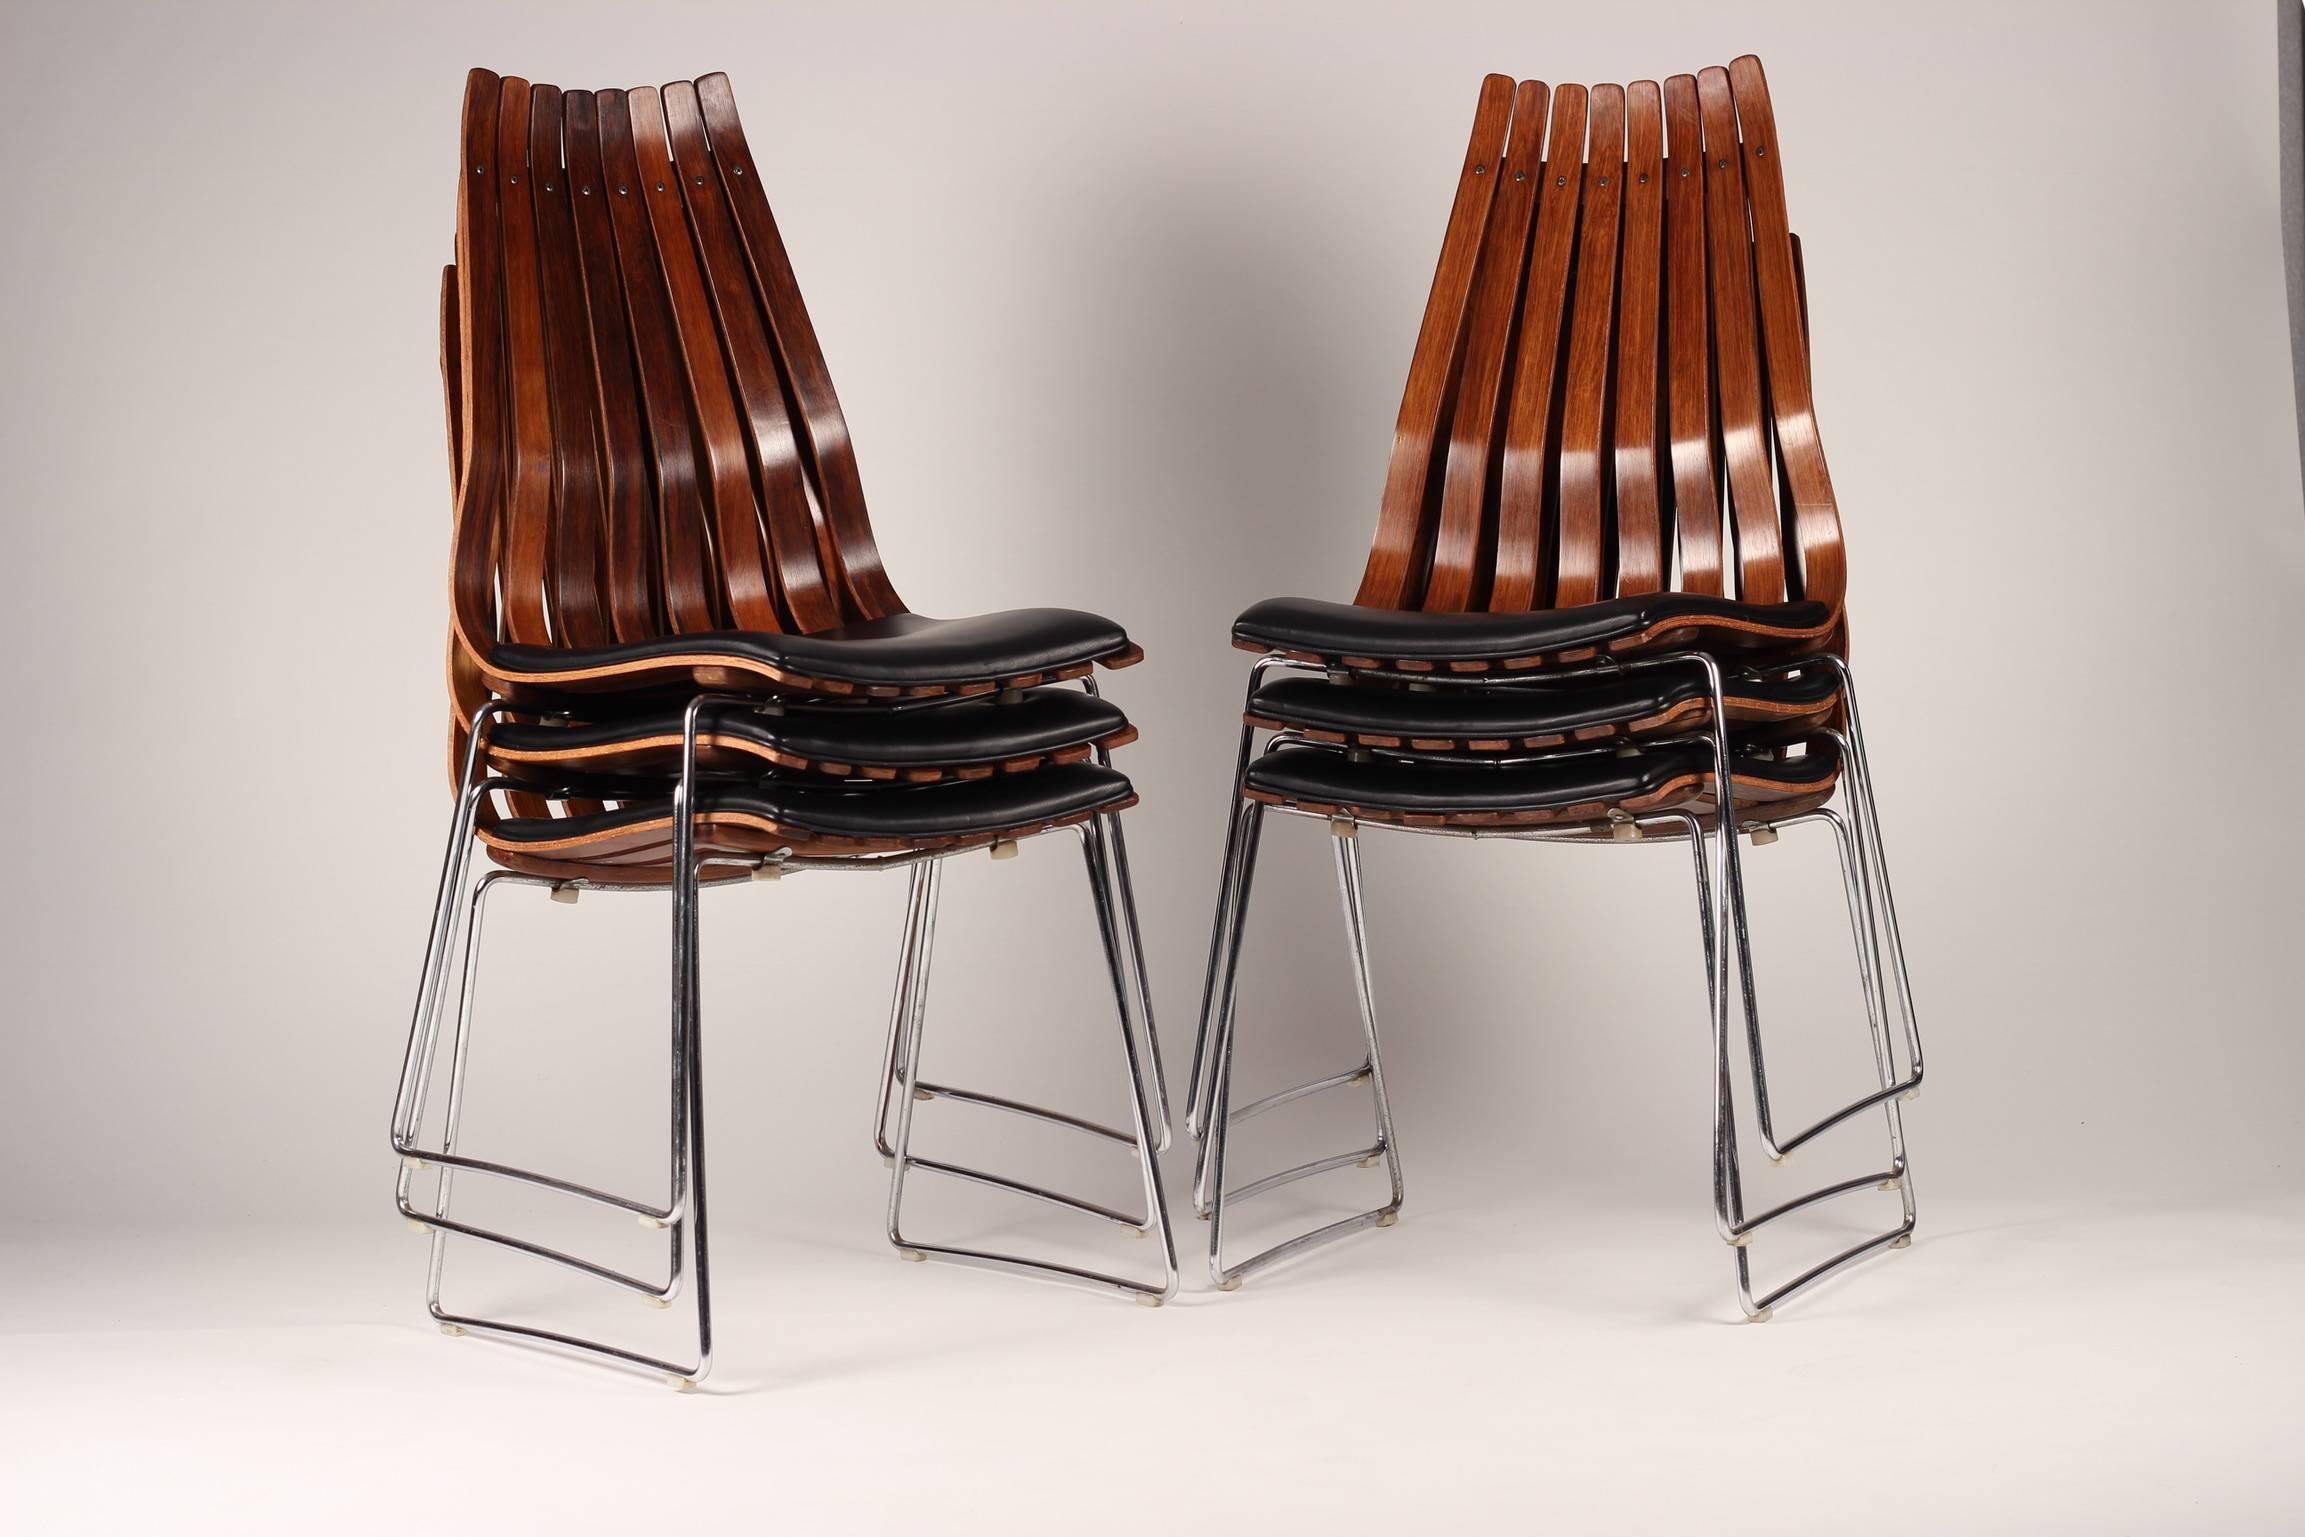 Scandinavian Modern Rosewood Dining Chairs by Hans Brattrud, set of Six. For Sale 1